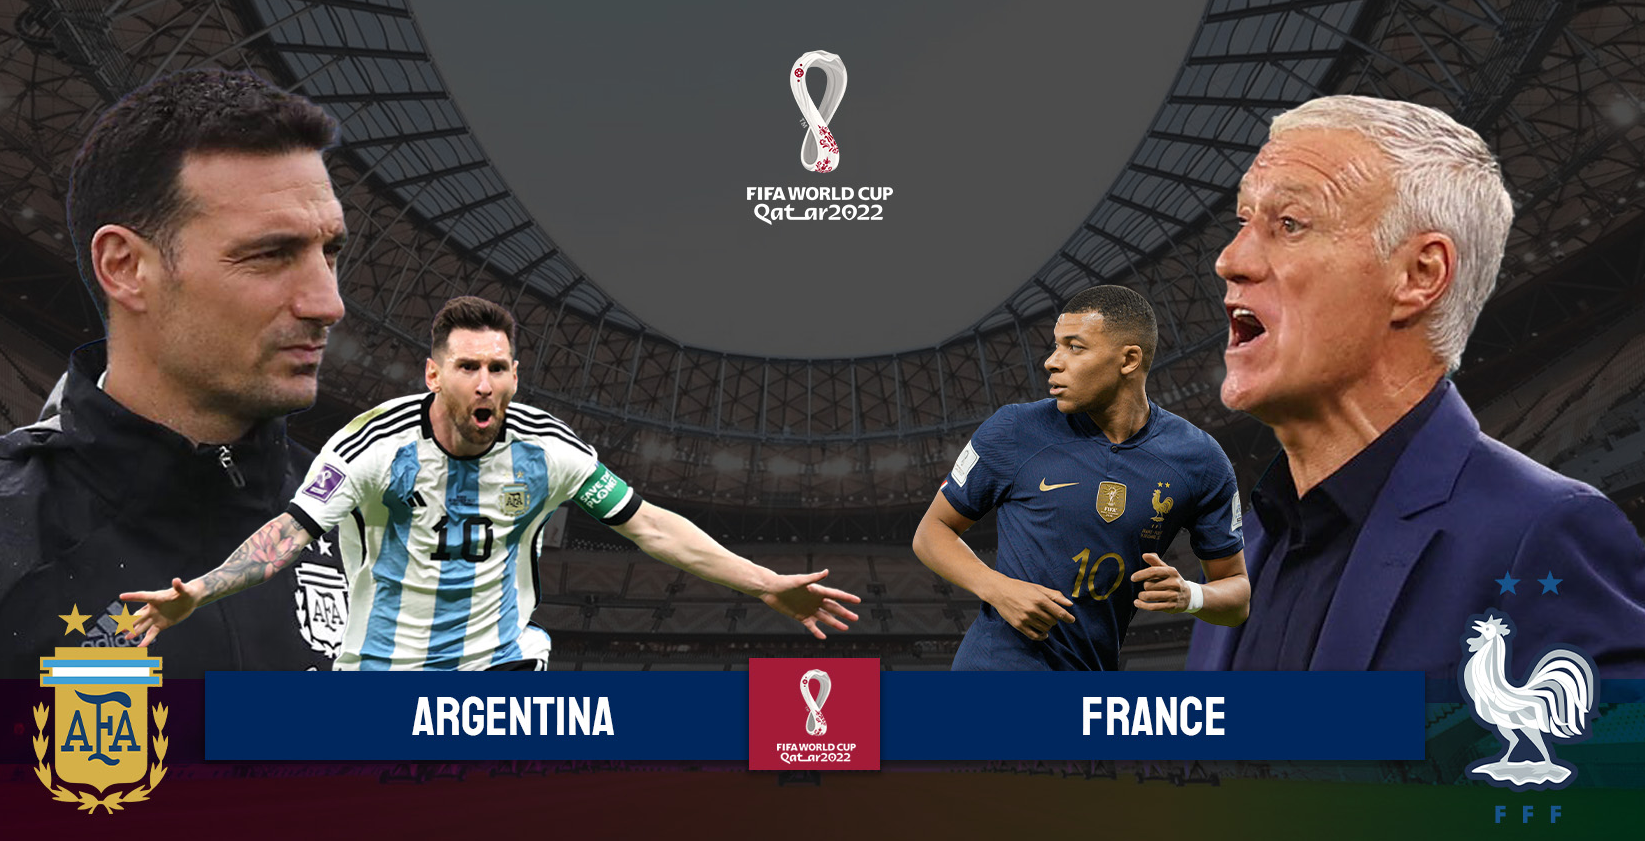 Argentina vs France: Will Messi Finally Win the World Cup or Is France Retaining Its World Title?